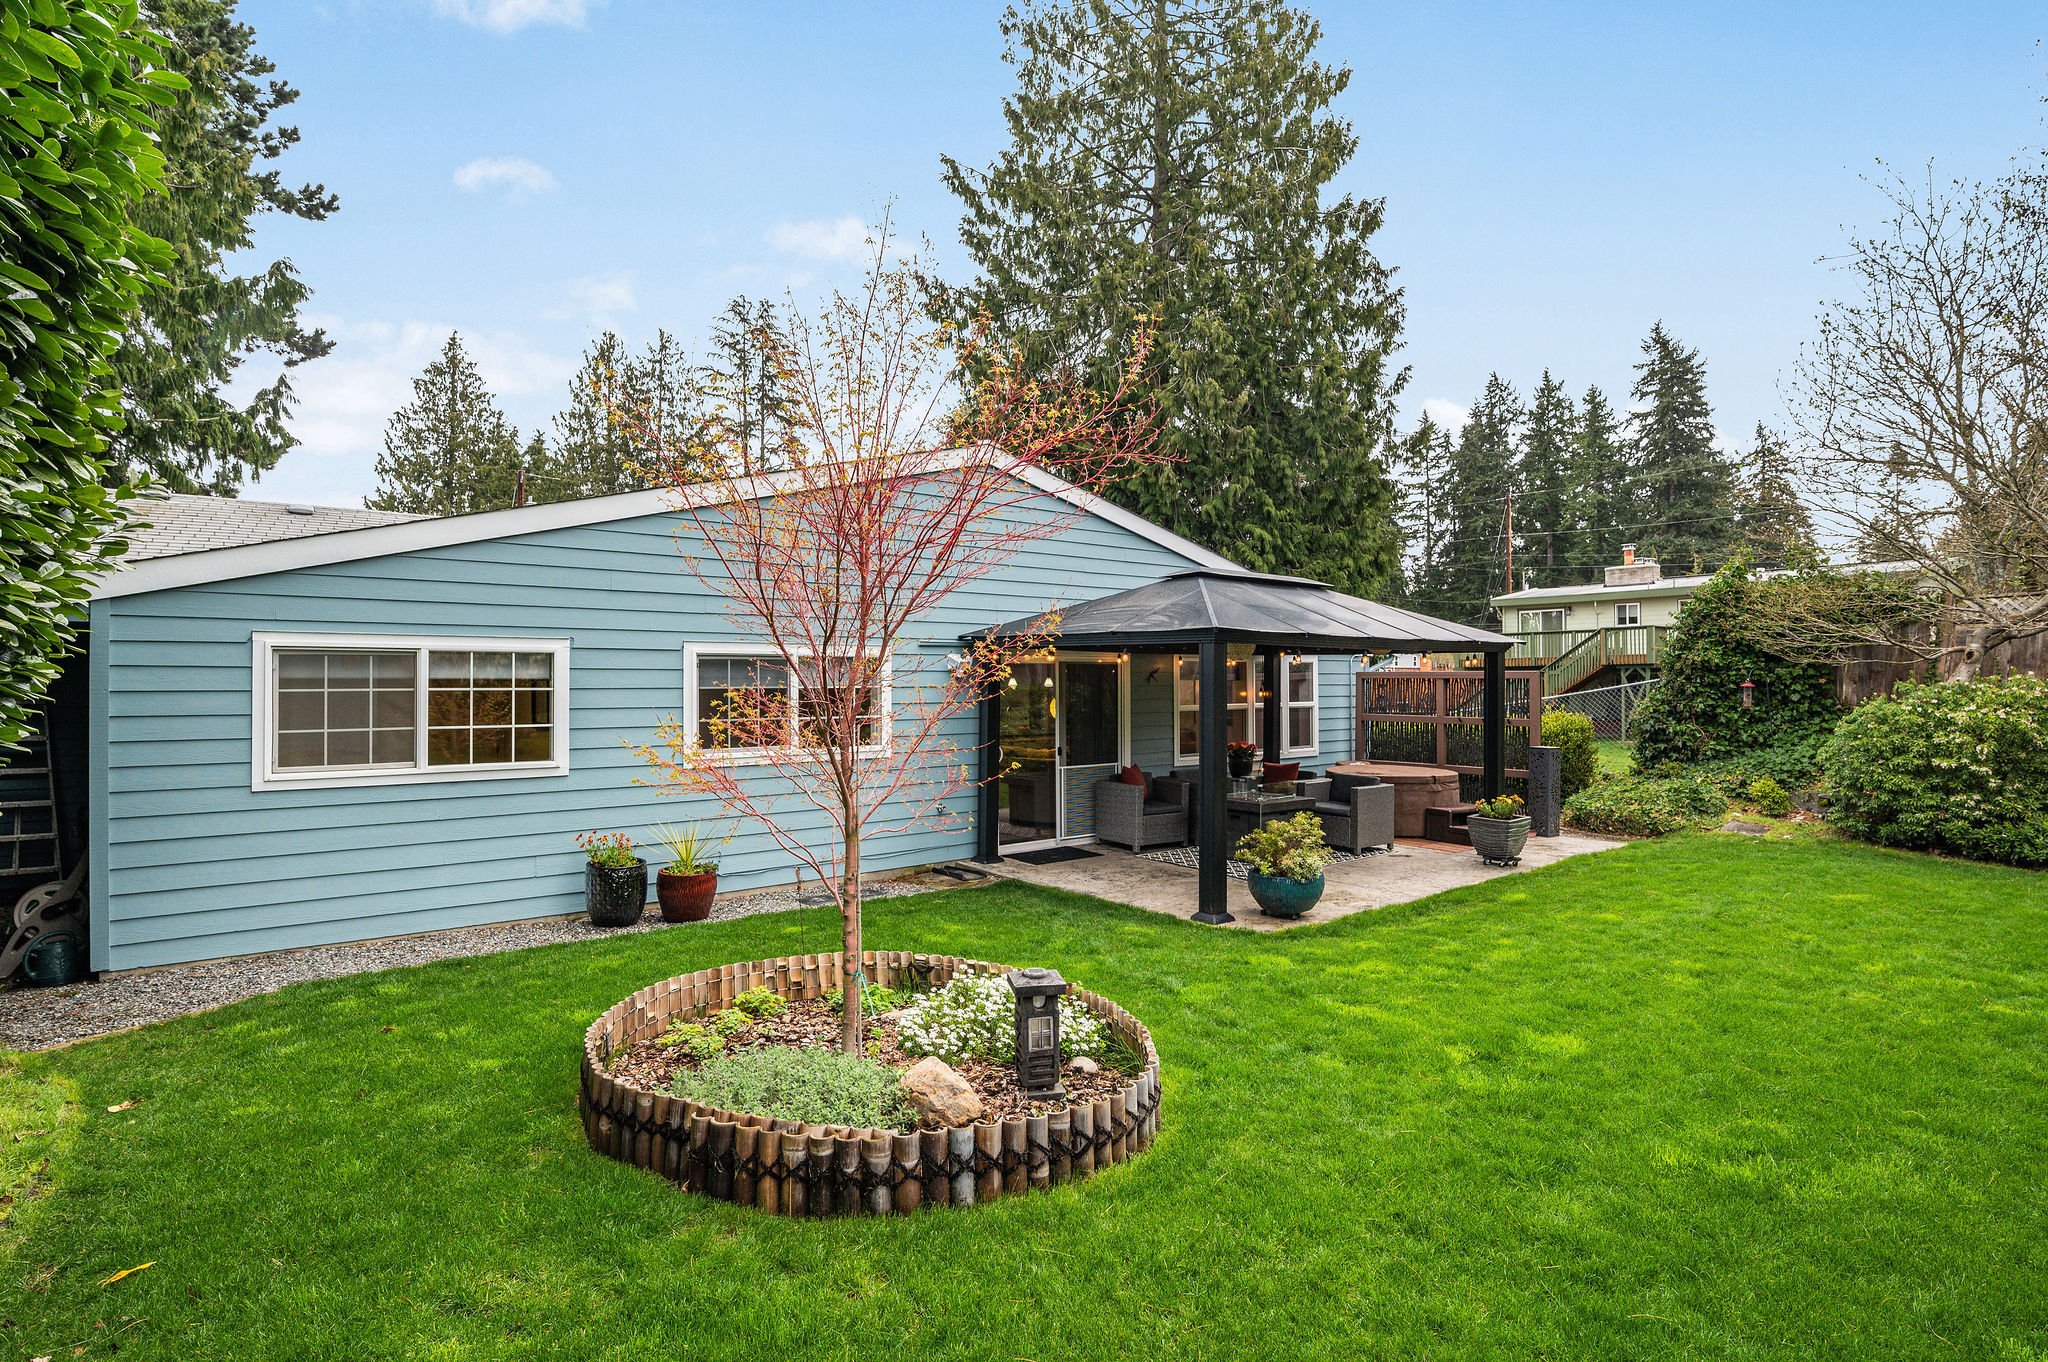  image description: exterior of one story blue house with patio with awning and patio furniture 